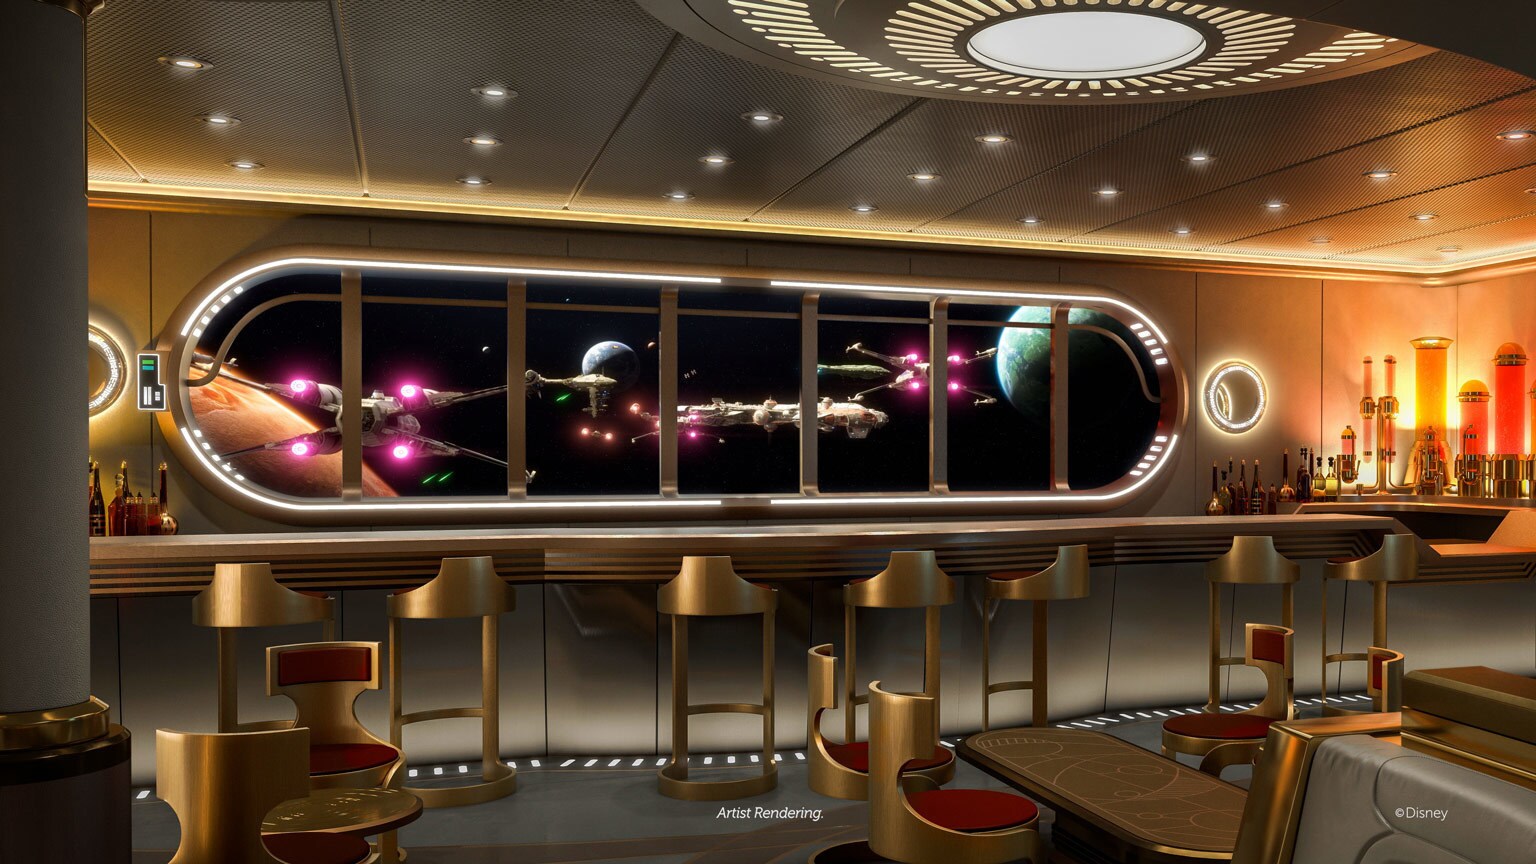 Here Are Over 40 Starships You'll Encounter at Disney Cruise Line’s Star Wars: Hyperspace Lounge - Exclusive